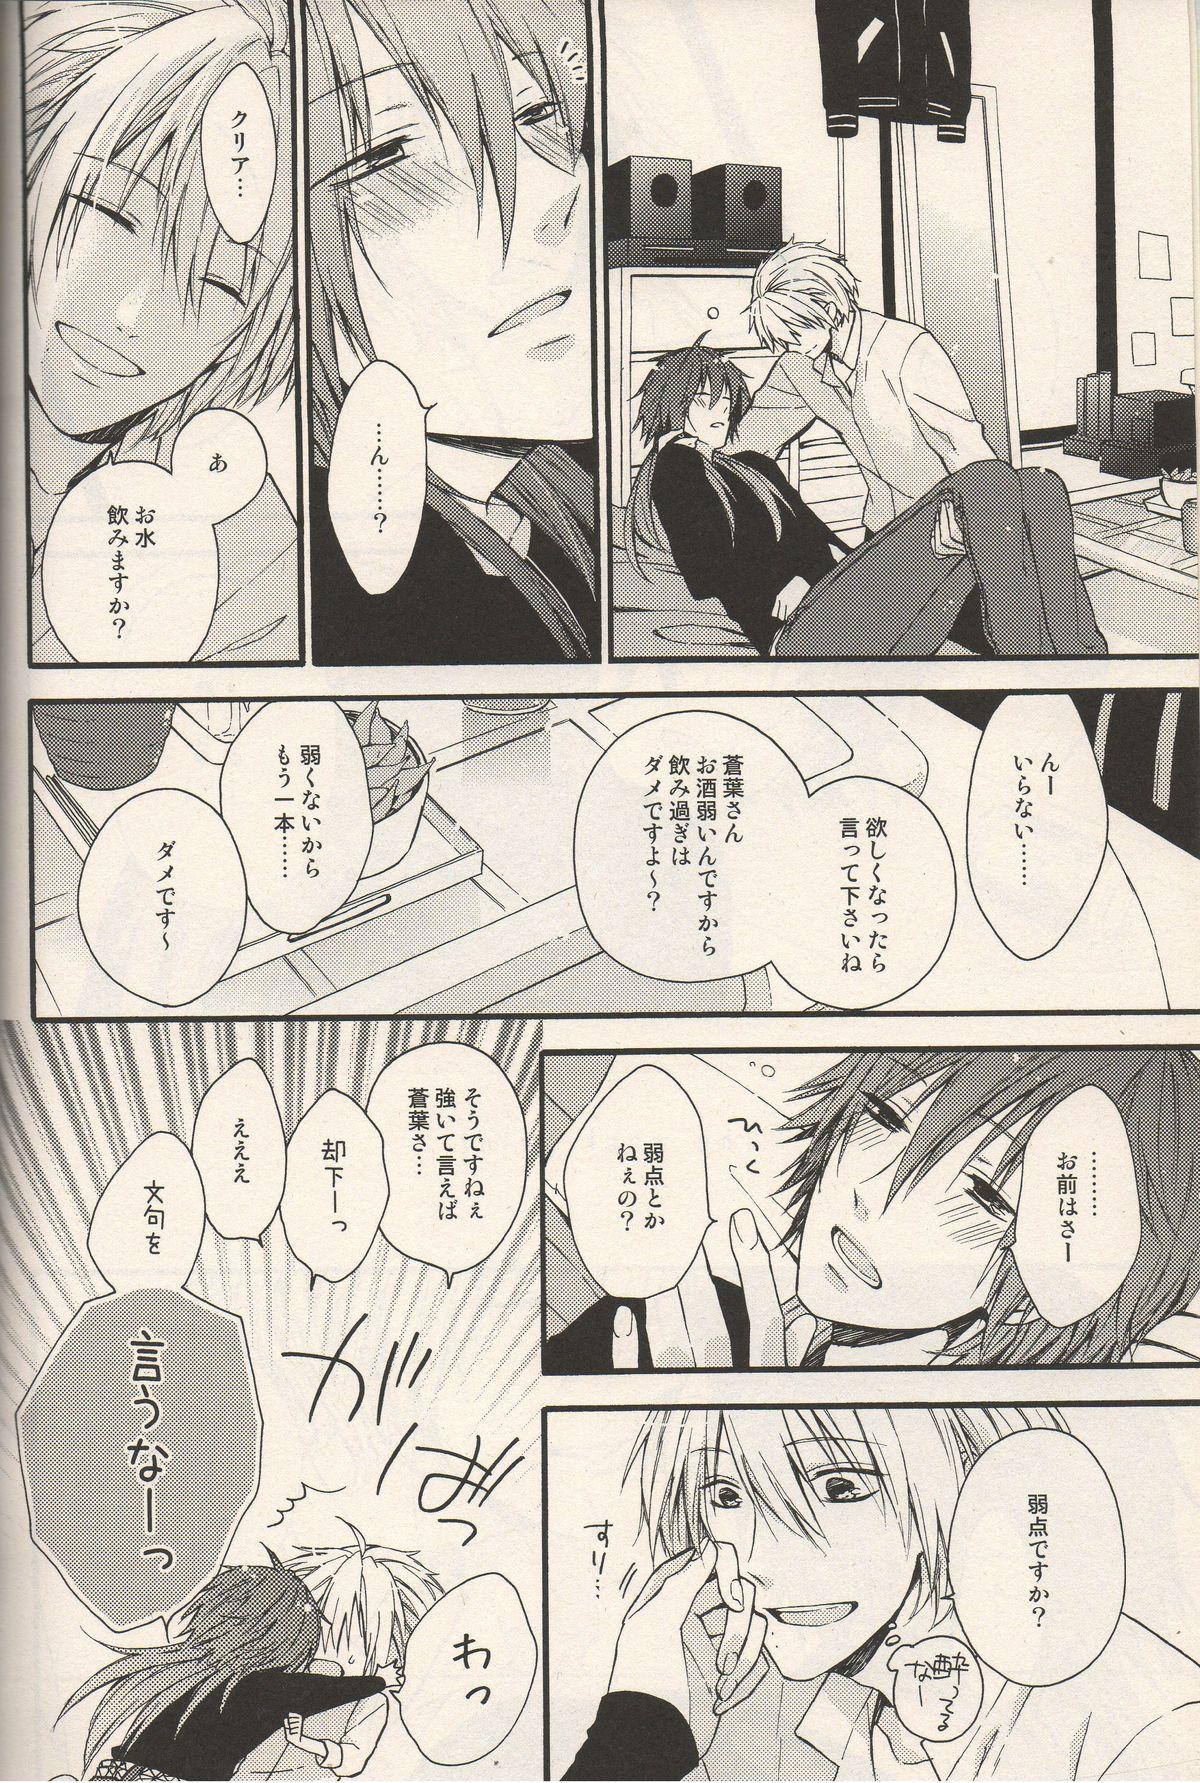 Girl Sucking Dick The Story About You - Dramatical murder Free Oral Sex - Page 6